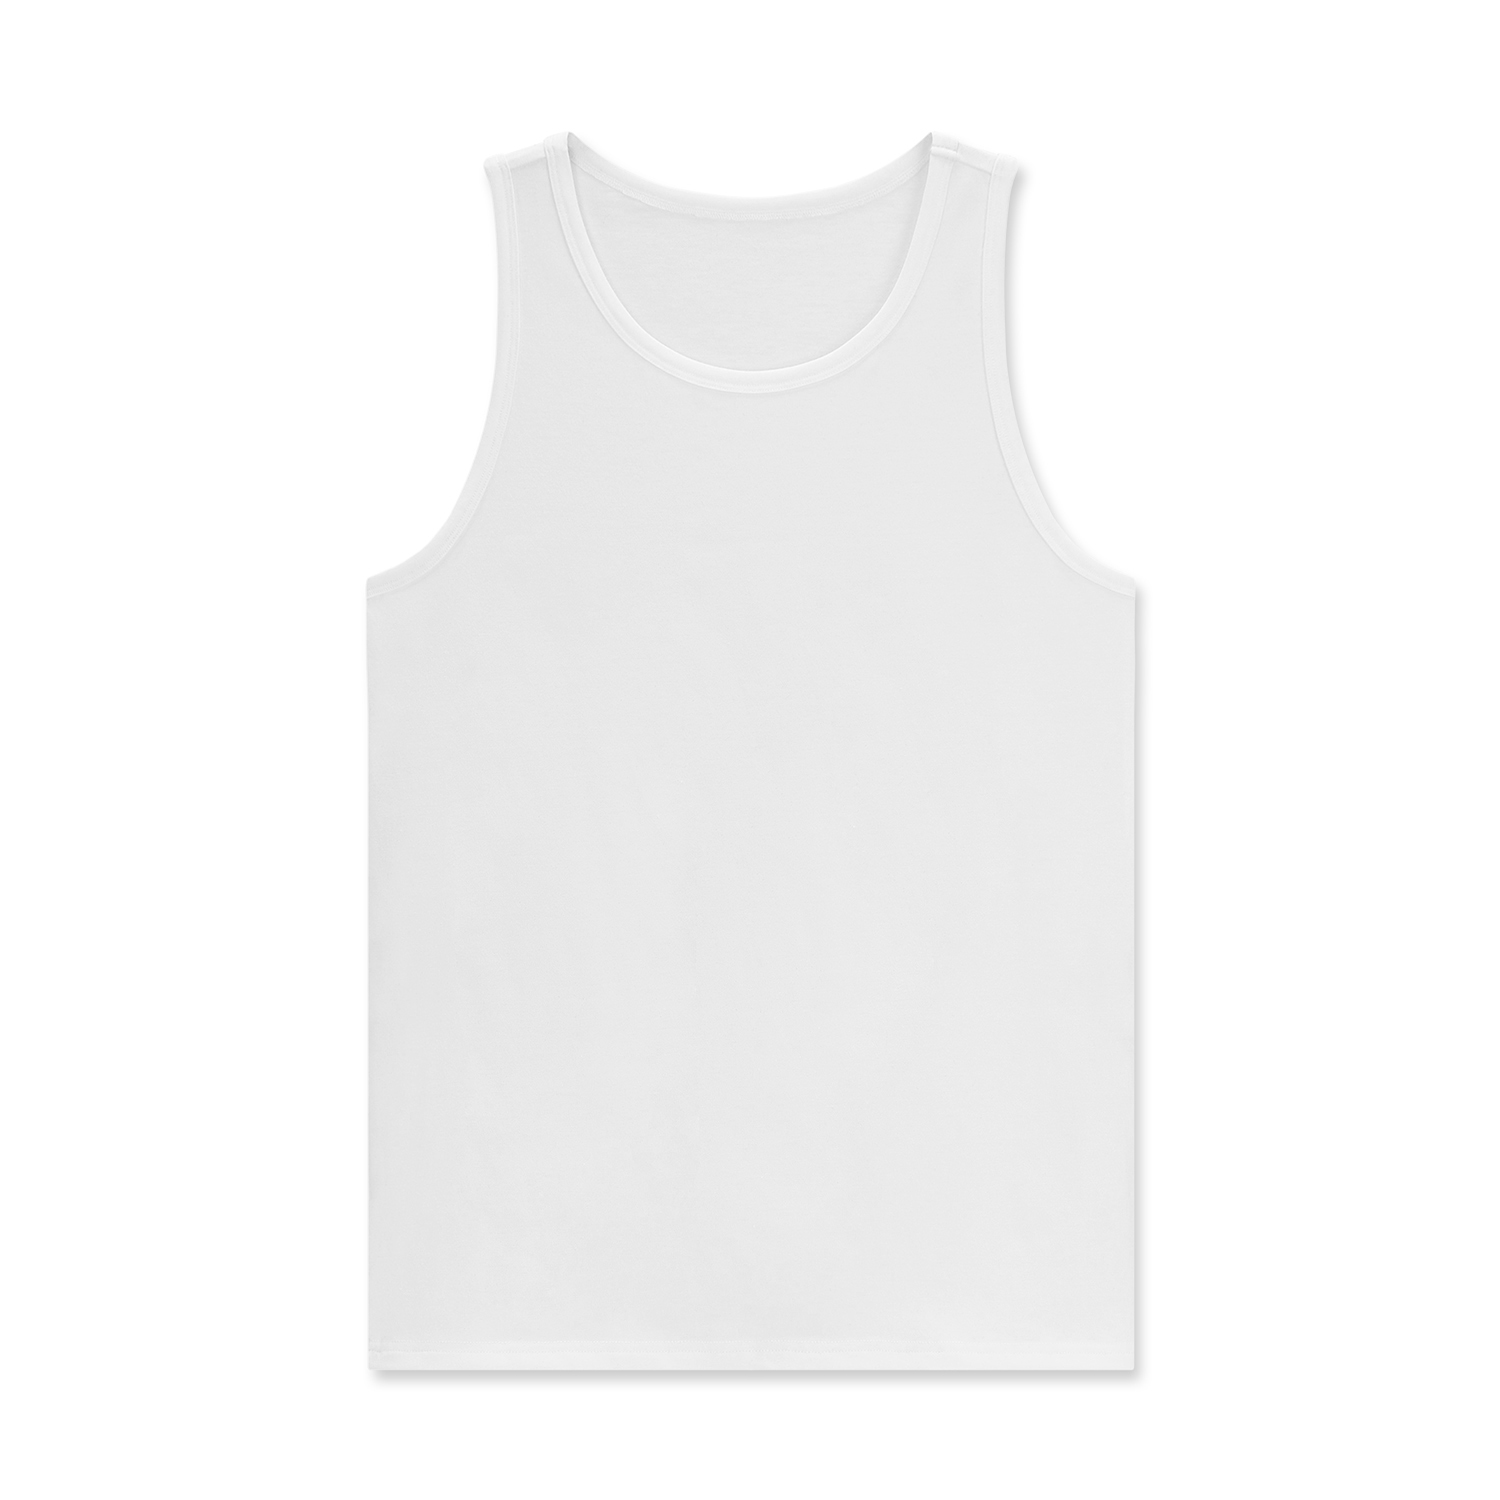 All-Over Print Unisex Muscle Tank Top | HugePOD-1